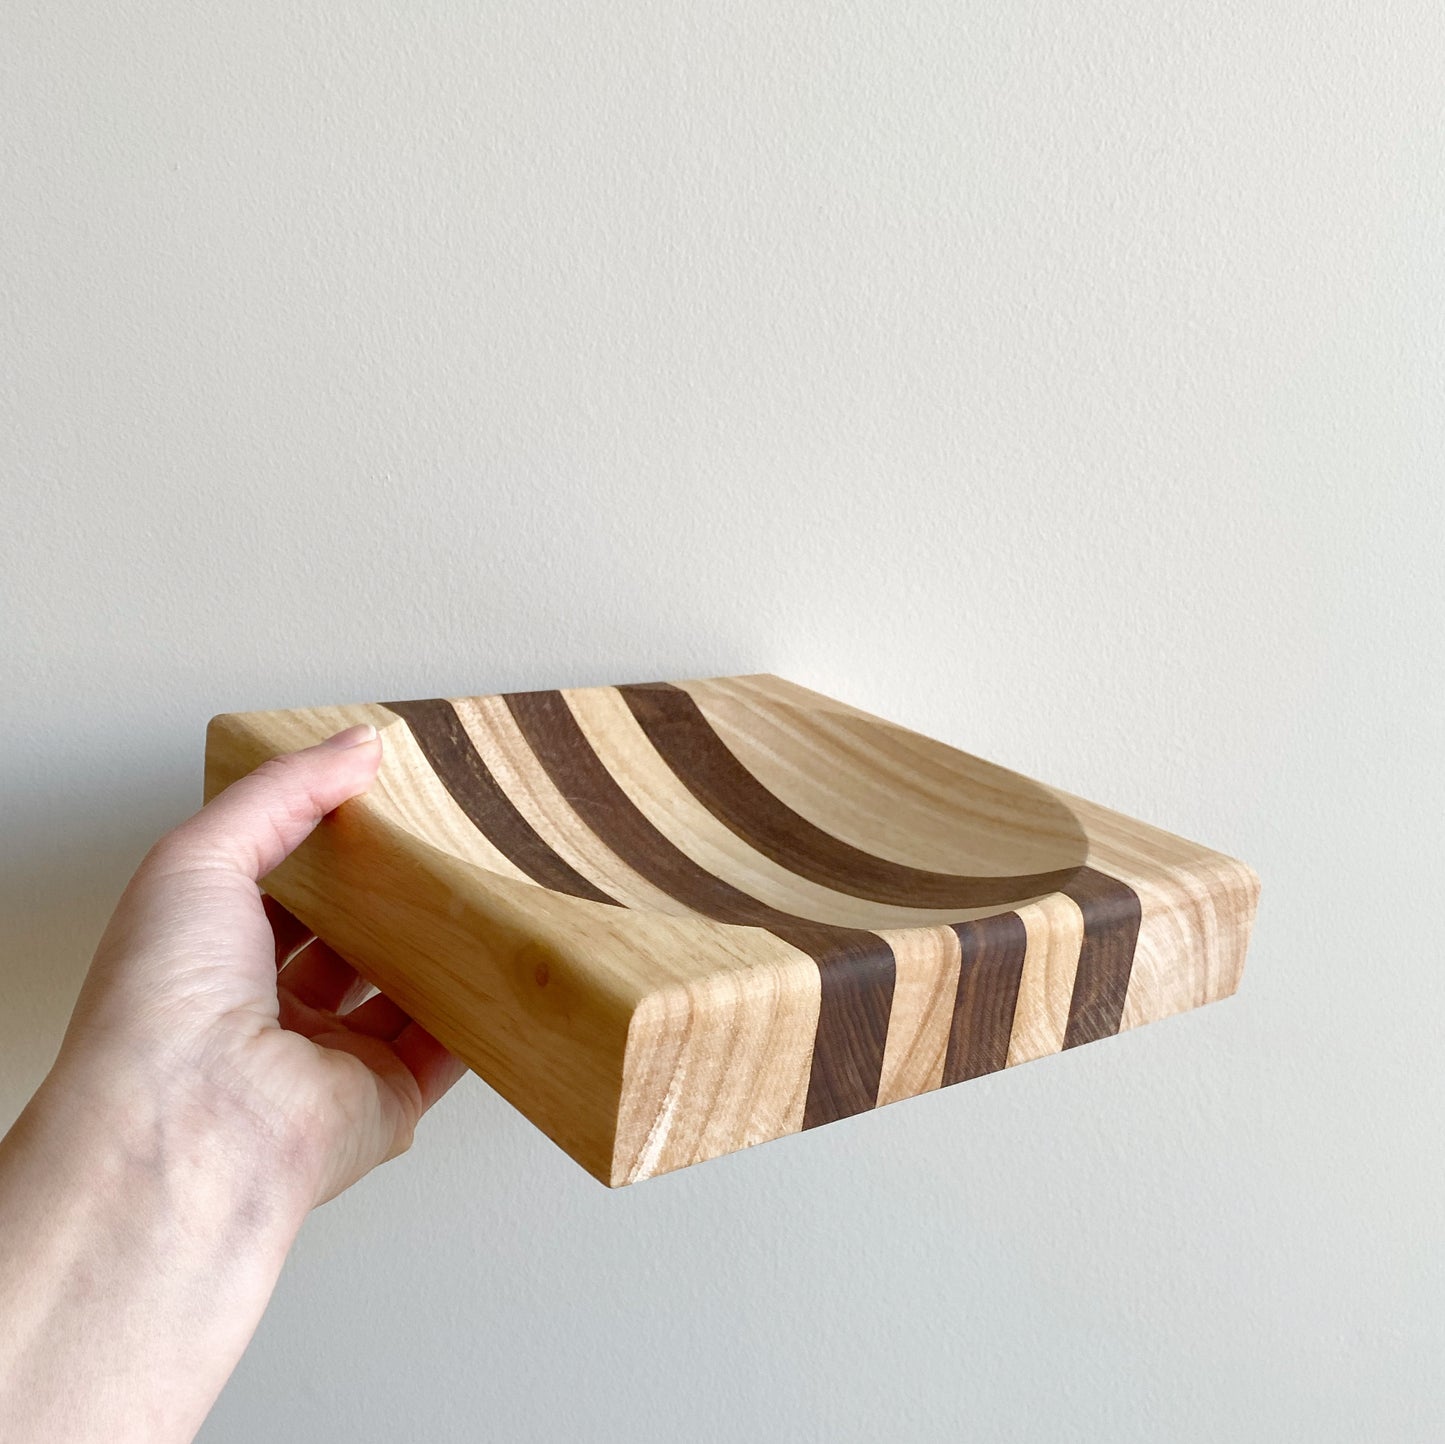 Handcrafted Wood Block Catchall